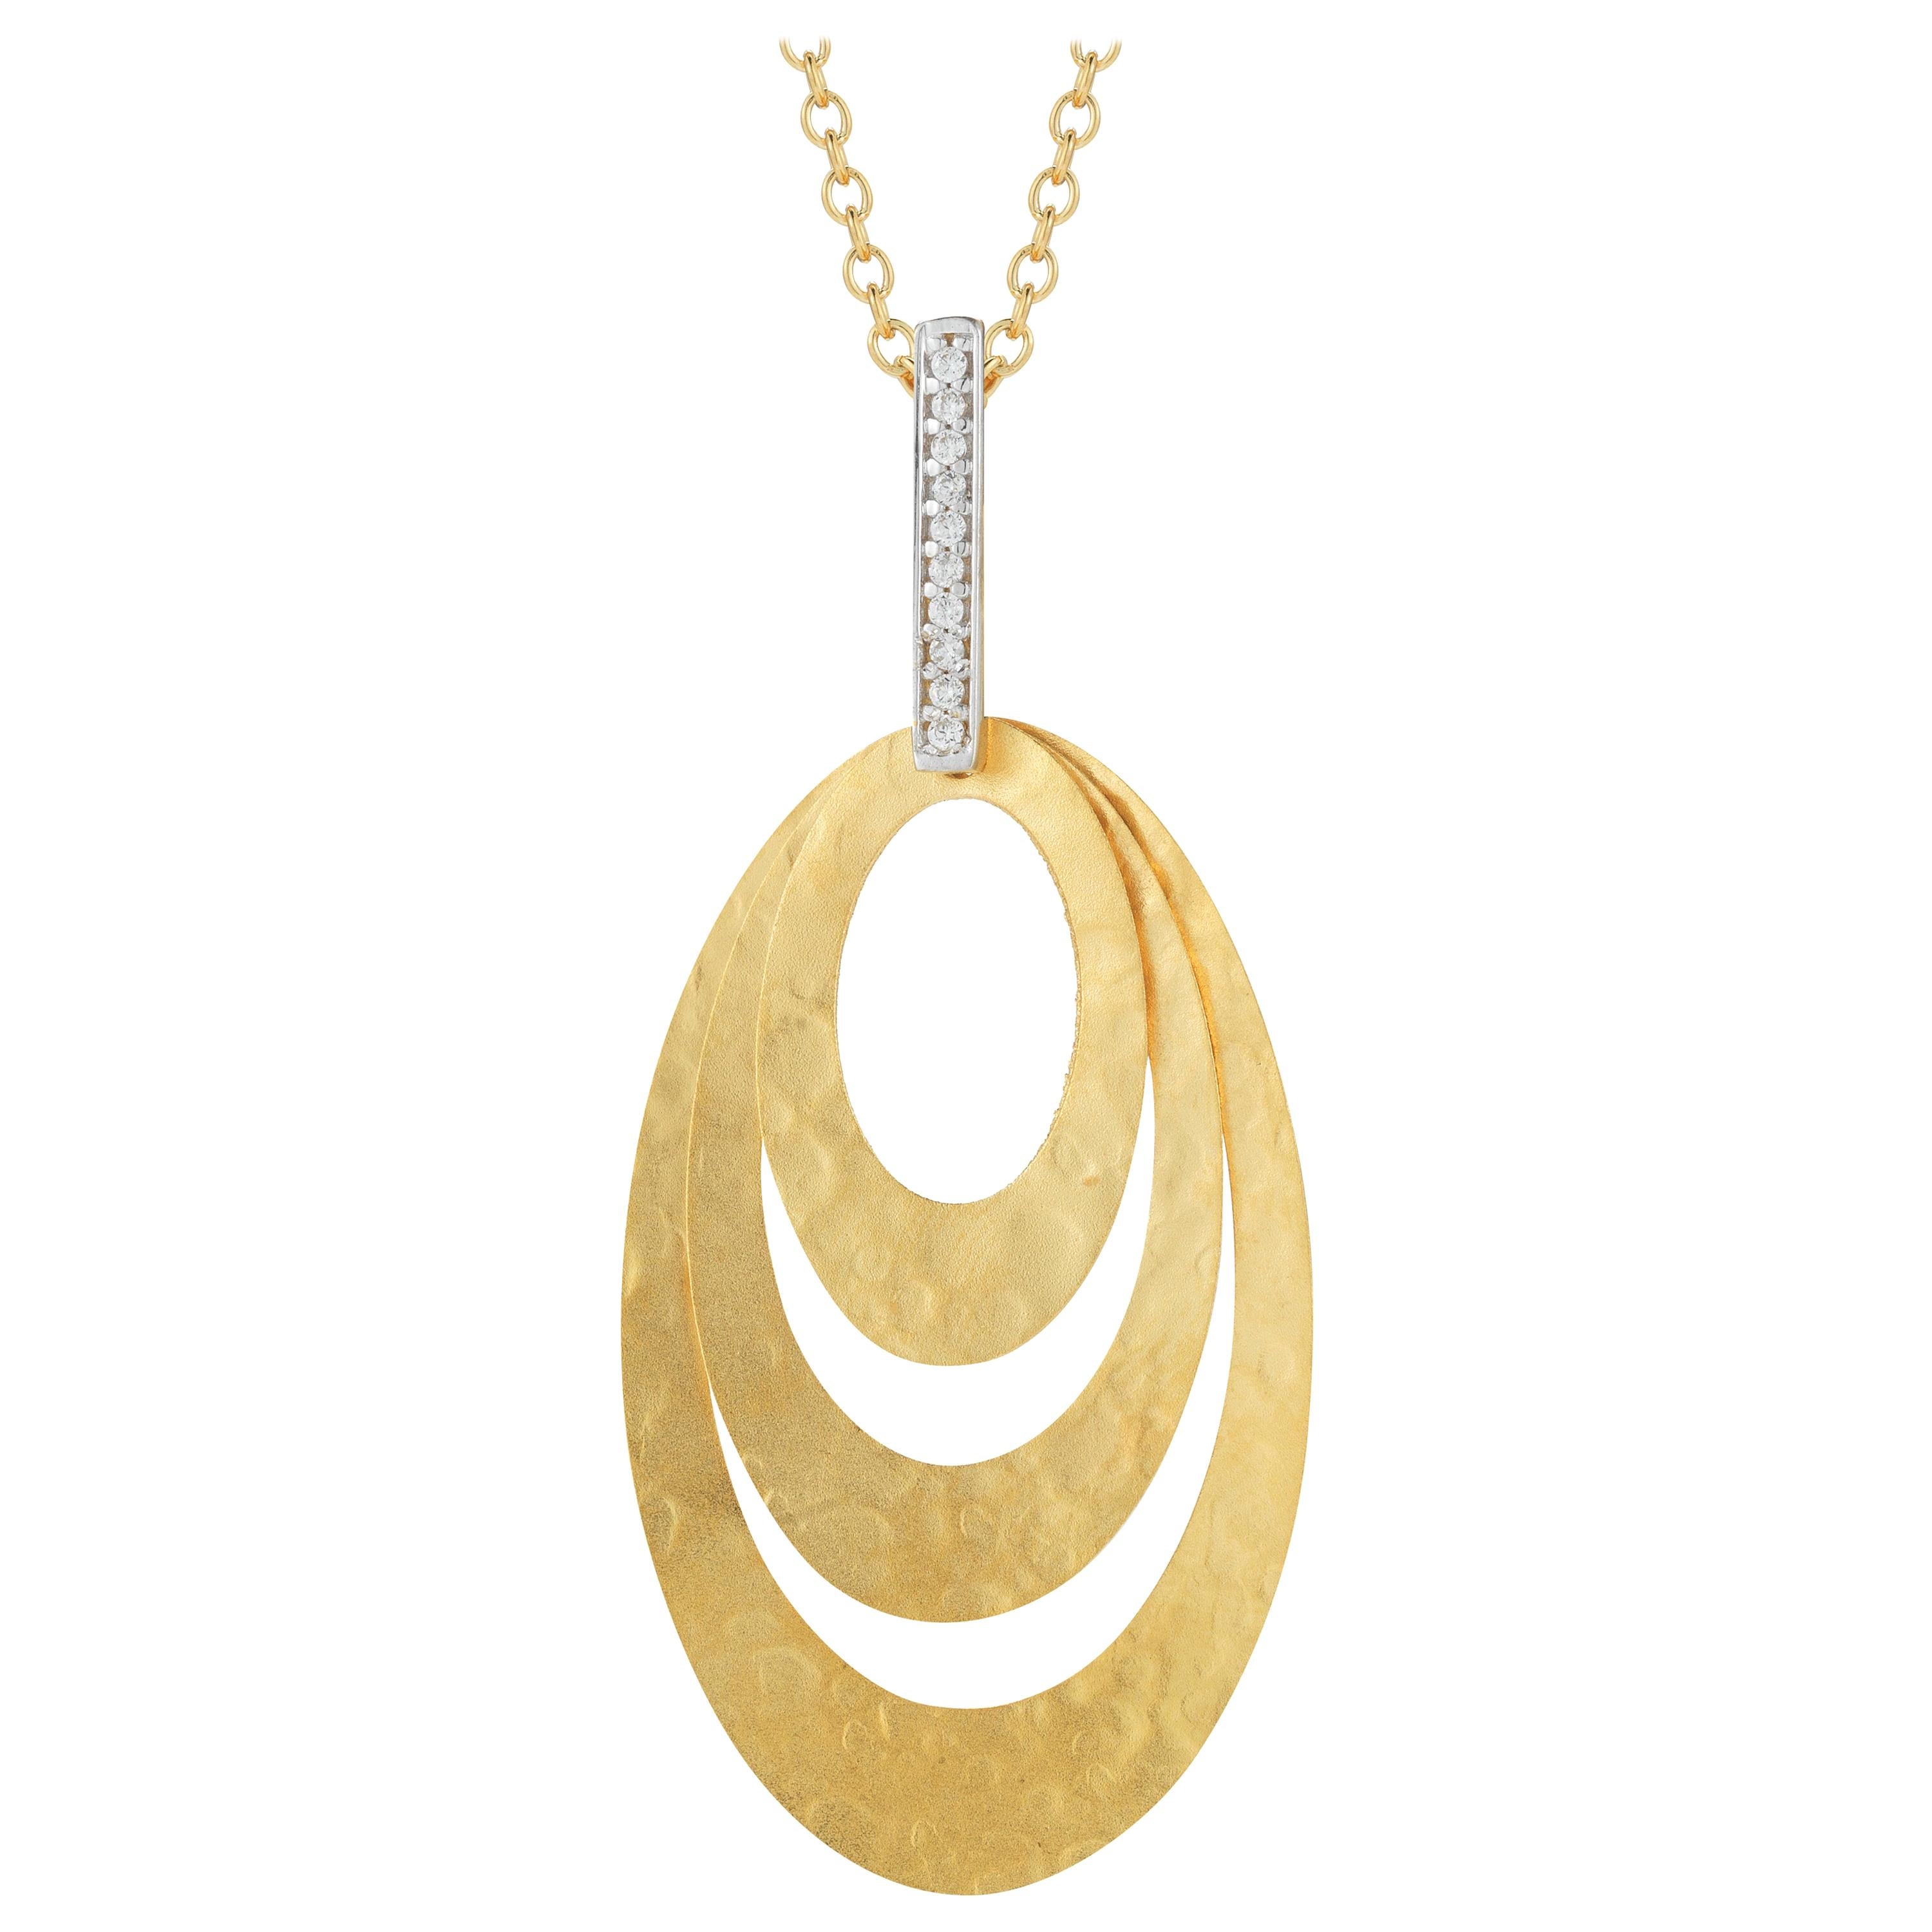 Handcrafted 14 Karat Yellow Gold Hammer-Finished Concentric-Ovals Pendant